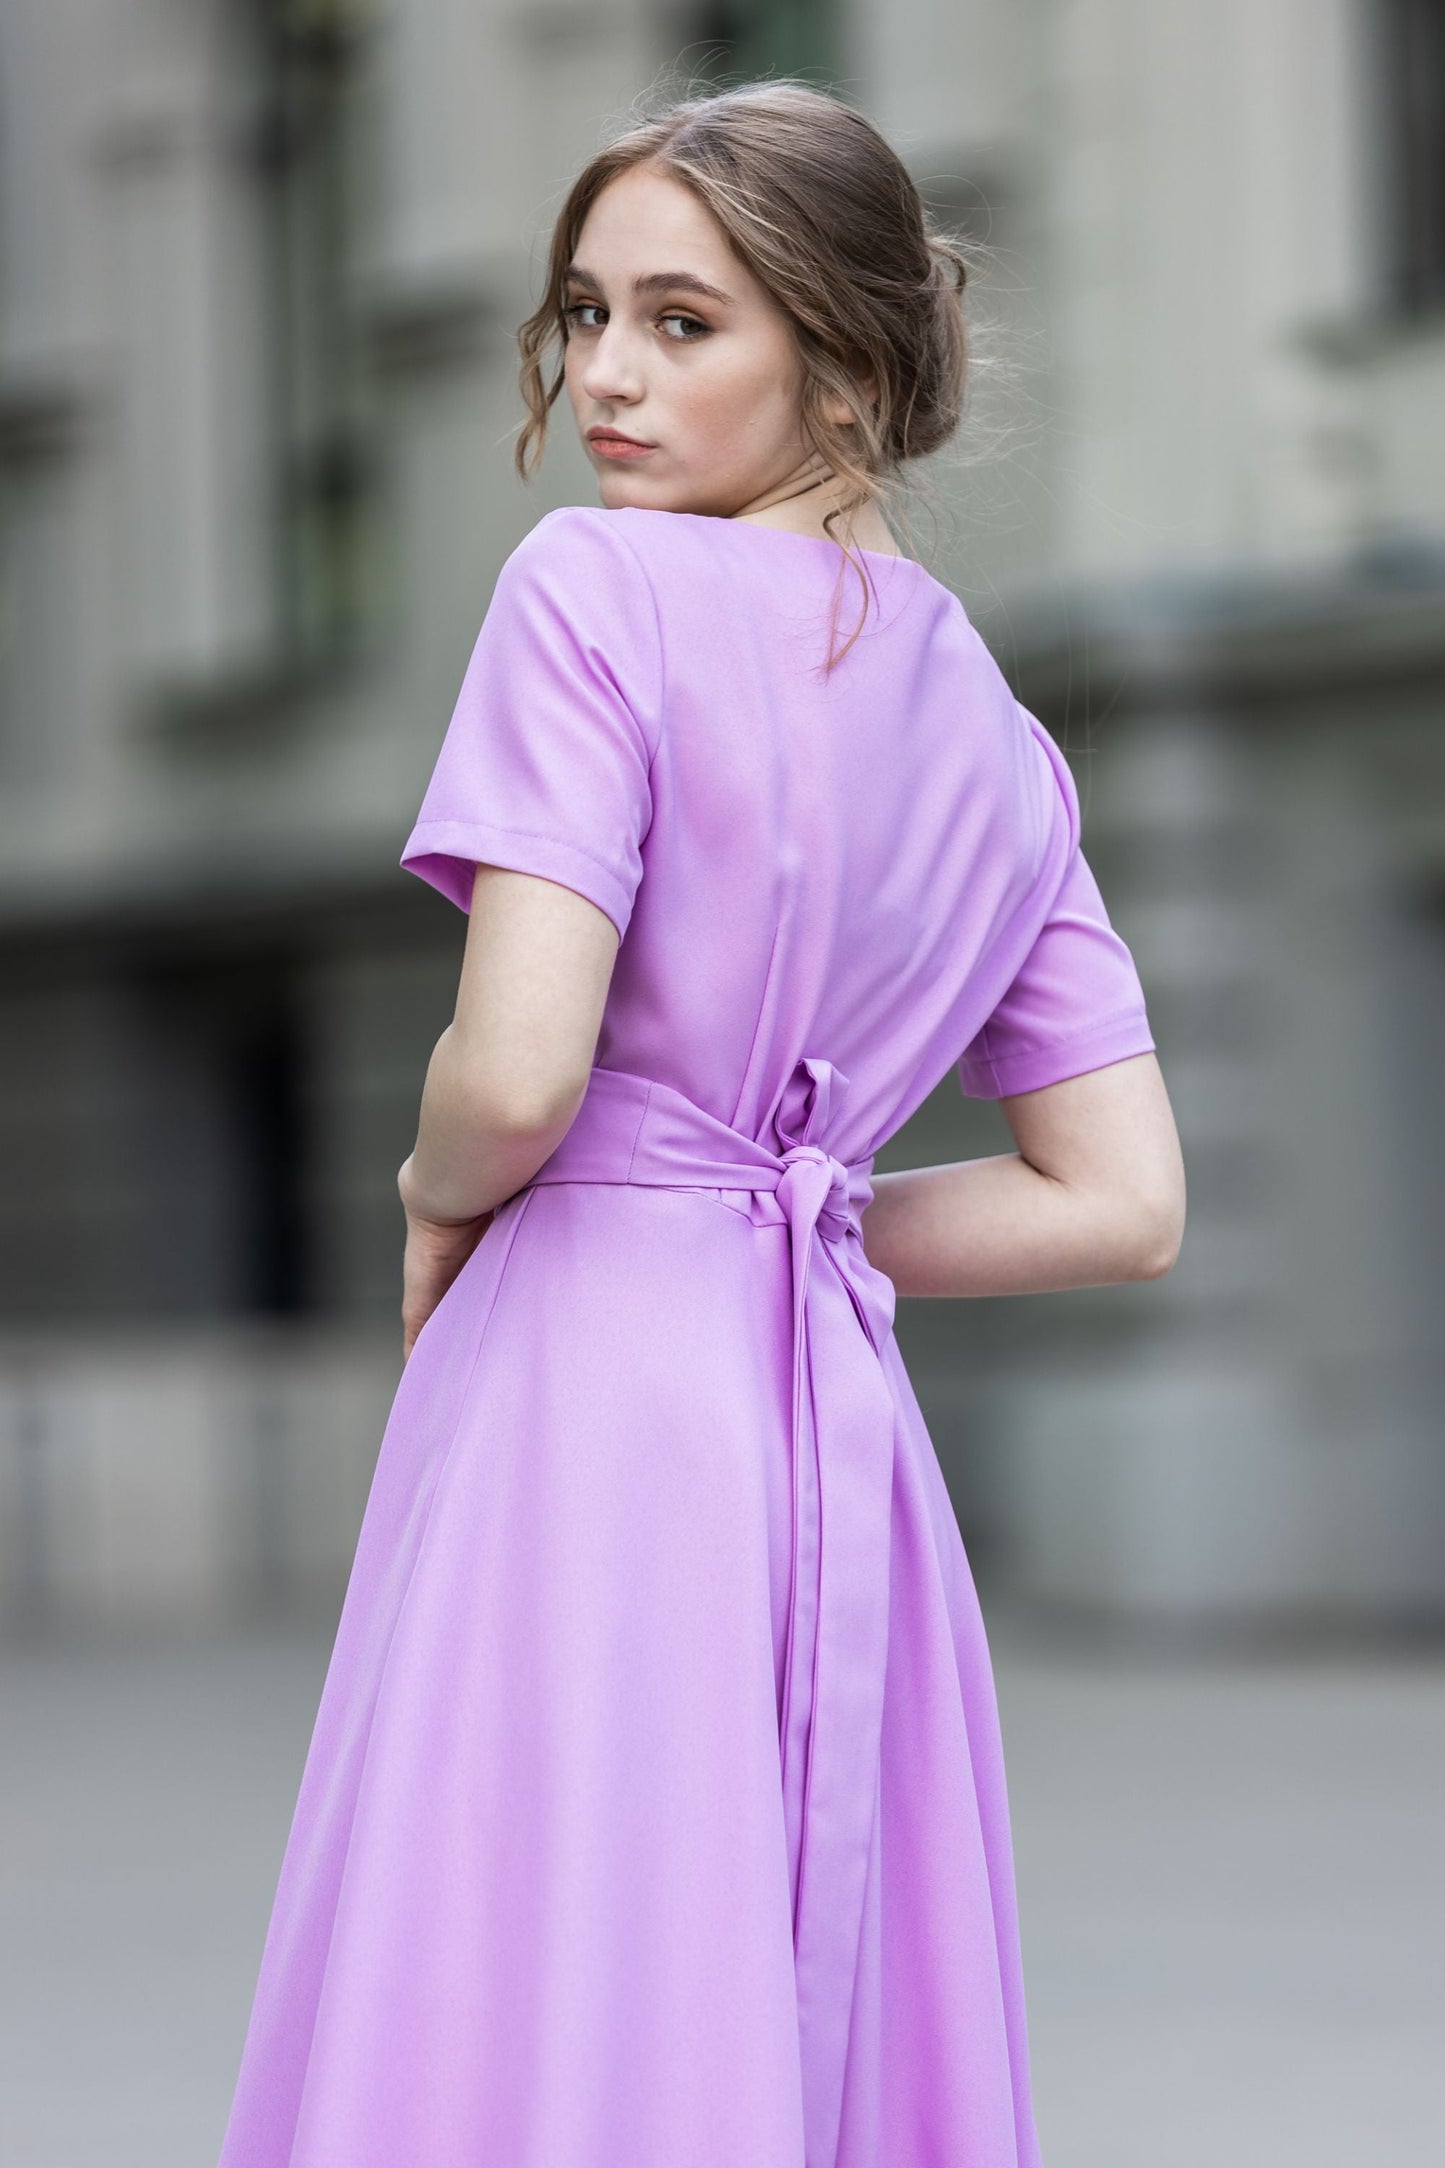 Periwinkle dress with circle skirts and belt